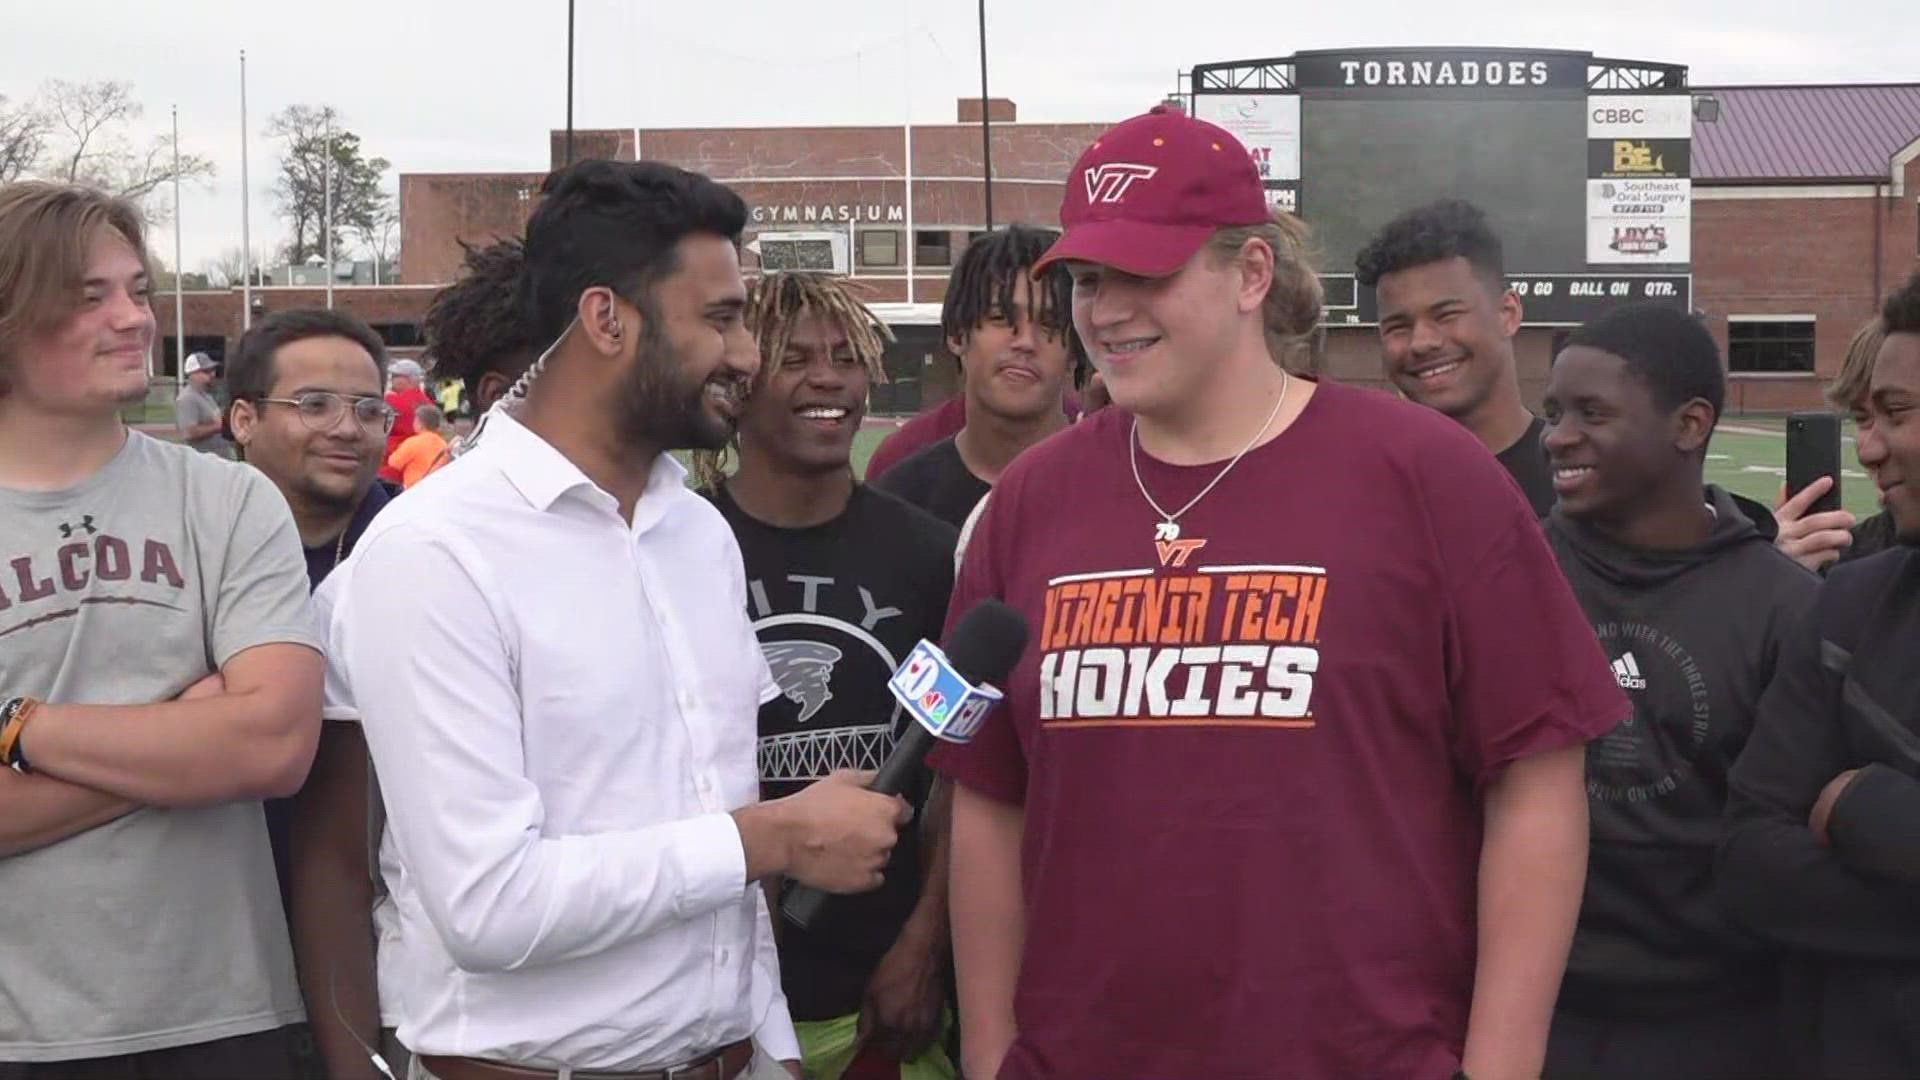 Lance Williams, an Alcoa High School 3-star offensive lineman, announced his verbal commitment to Virginia Tech on Monday.